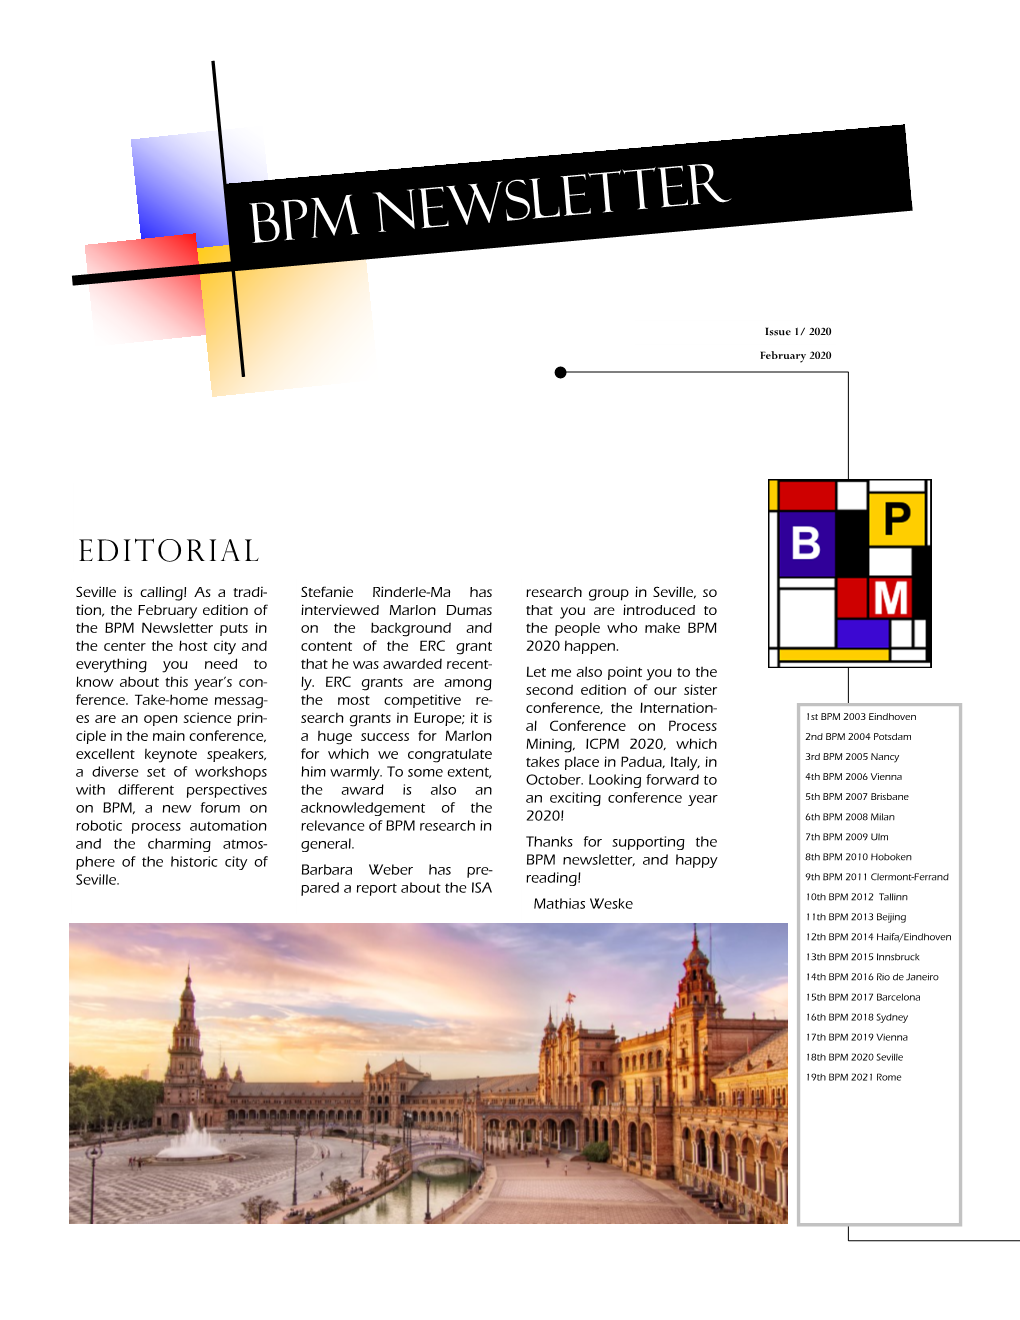 BPM Newsletter Puts in on the Background and the People Who Make BPM the Center the Host City and Content of the ERC Grant 2020 Happen